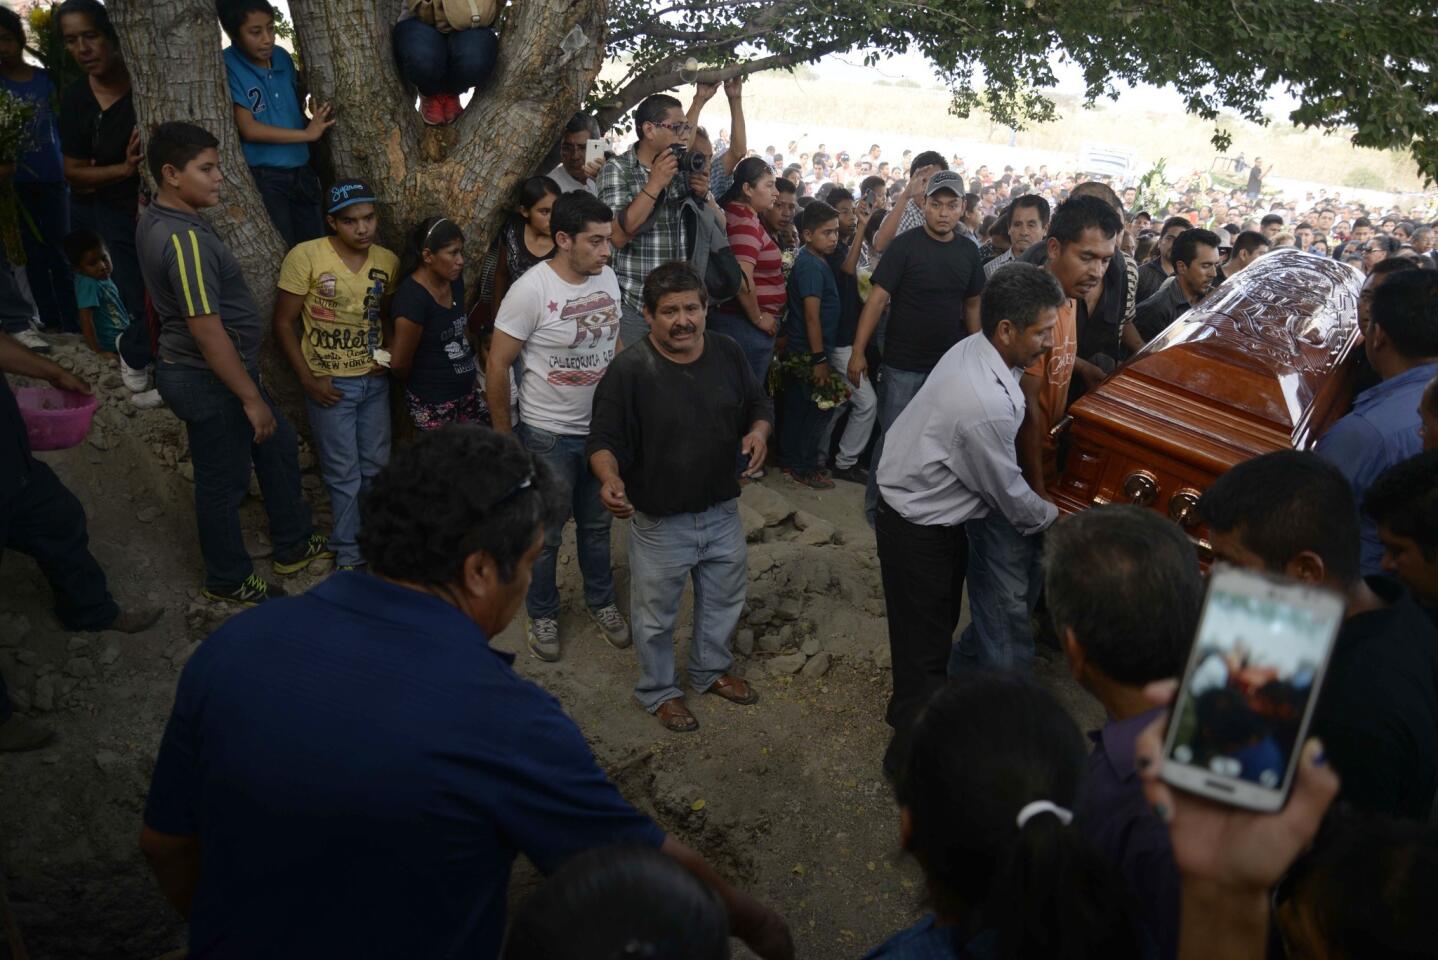 Mourners carry the coffin of slain mayor of Temixco, Gisela Mota, to the cemetery in Pueblo Viejo, Mexico. The governor of the southern Mexican state of Morelos says the killing of the mayor was a warning by drug gangs, meant to convince other officials to reject state police control of local forces. (AP Photo/Tony Rivera)